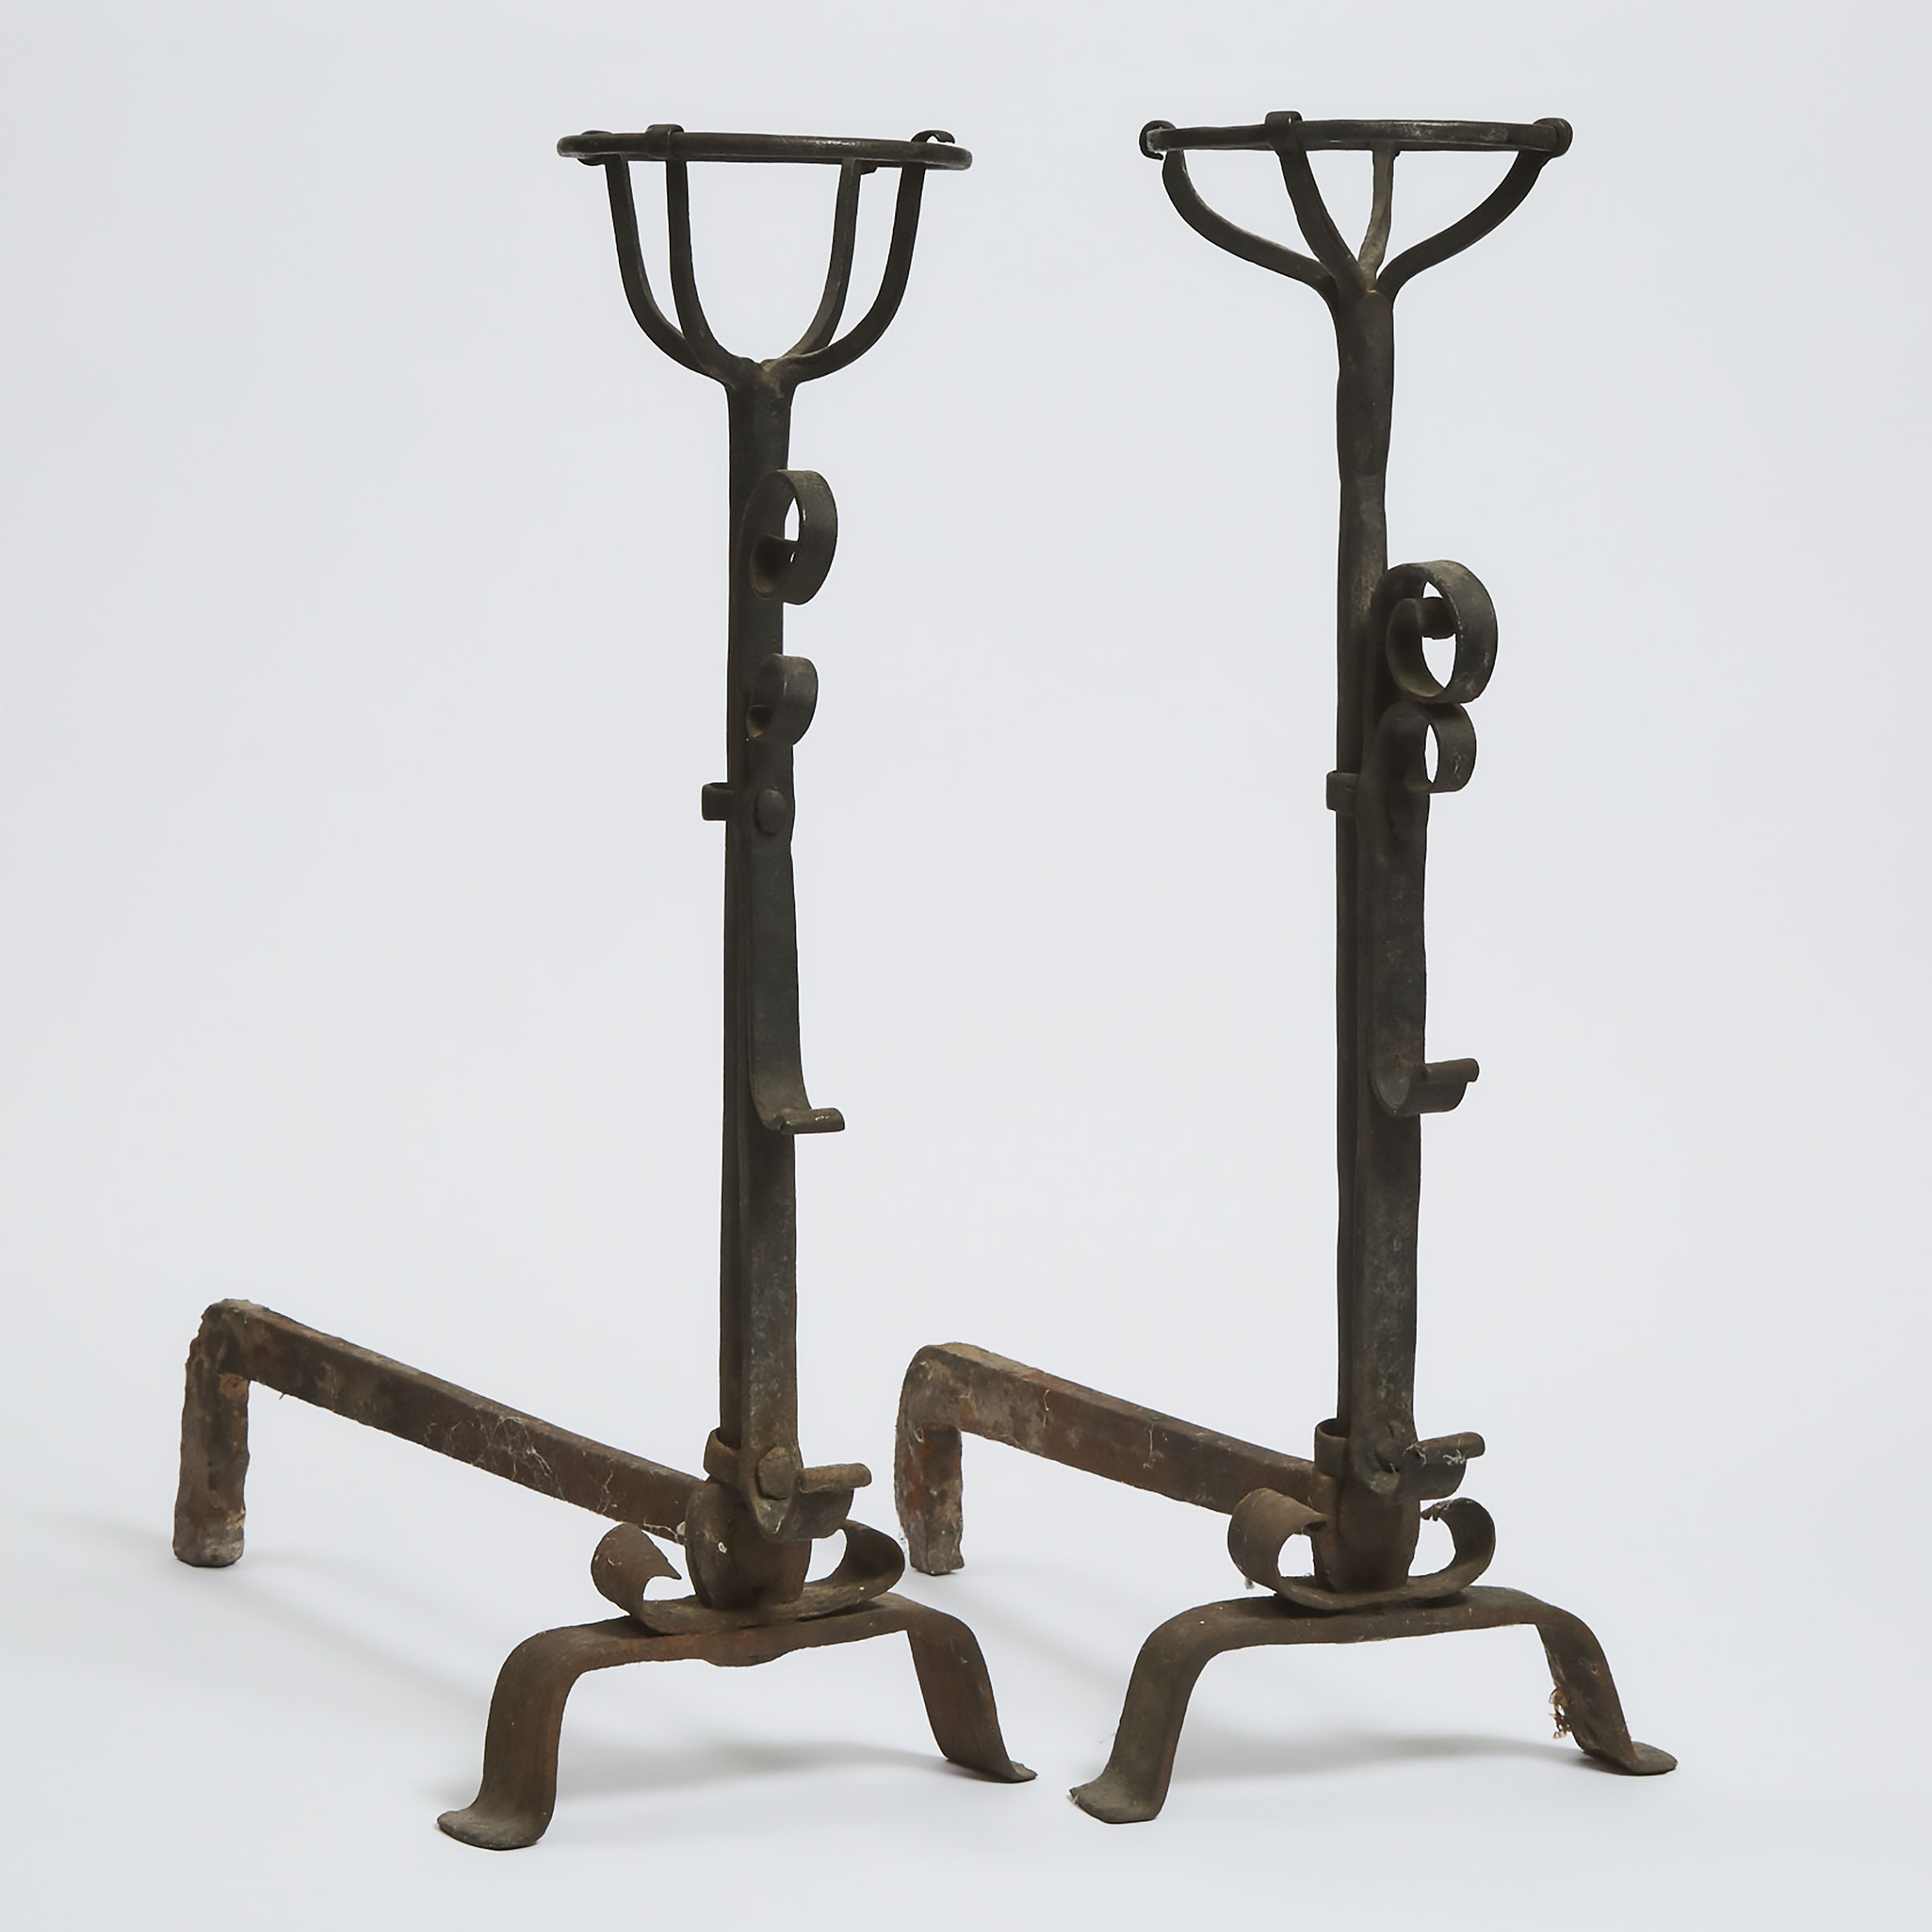 Matched Pair of Wrought Iron Basket